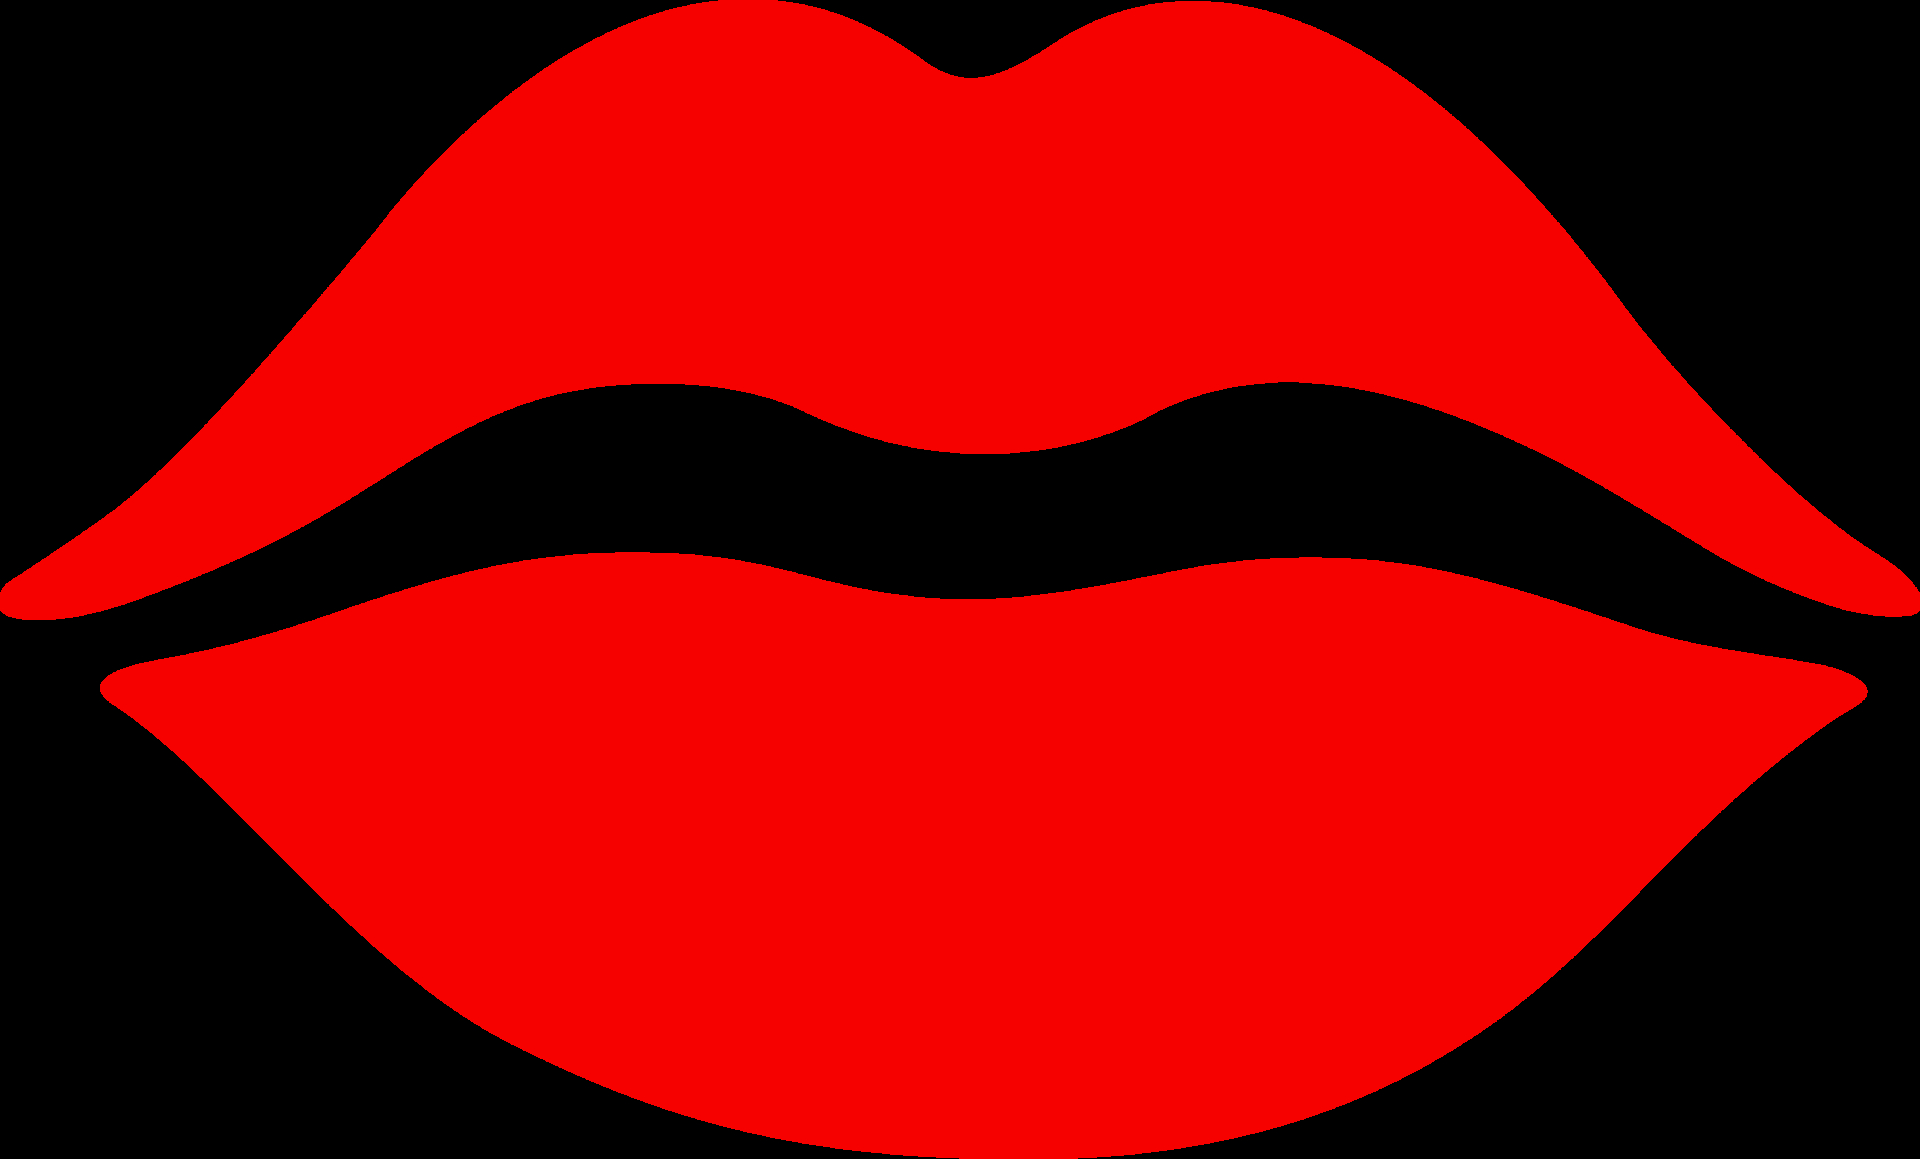 1920x1440 px) HD Wallpapers : Simple Red Lips Design Free Clip Art ...